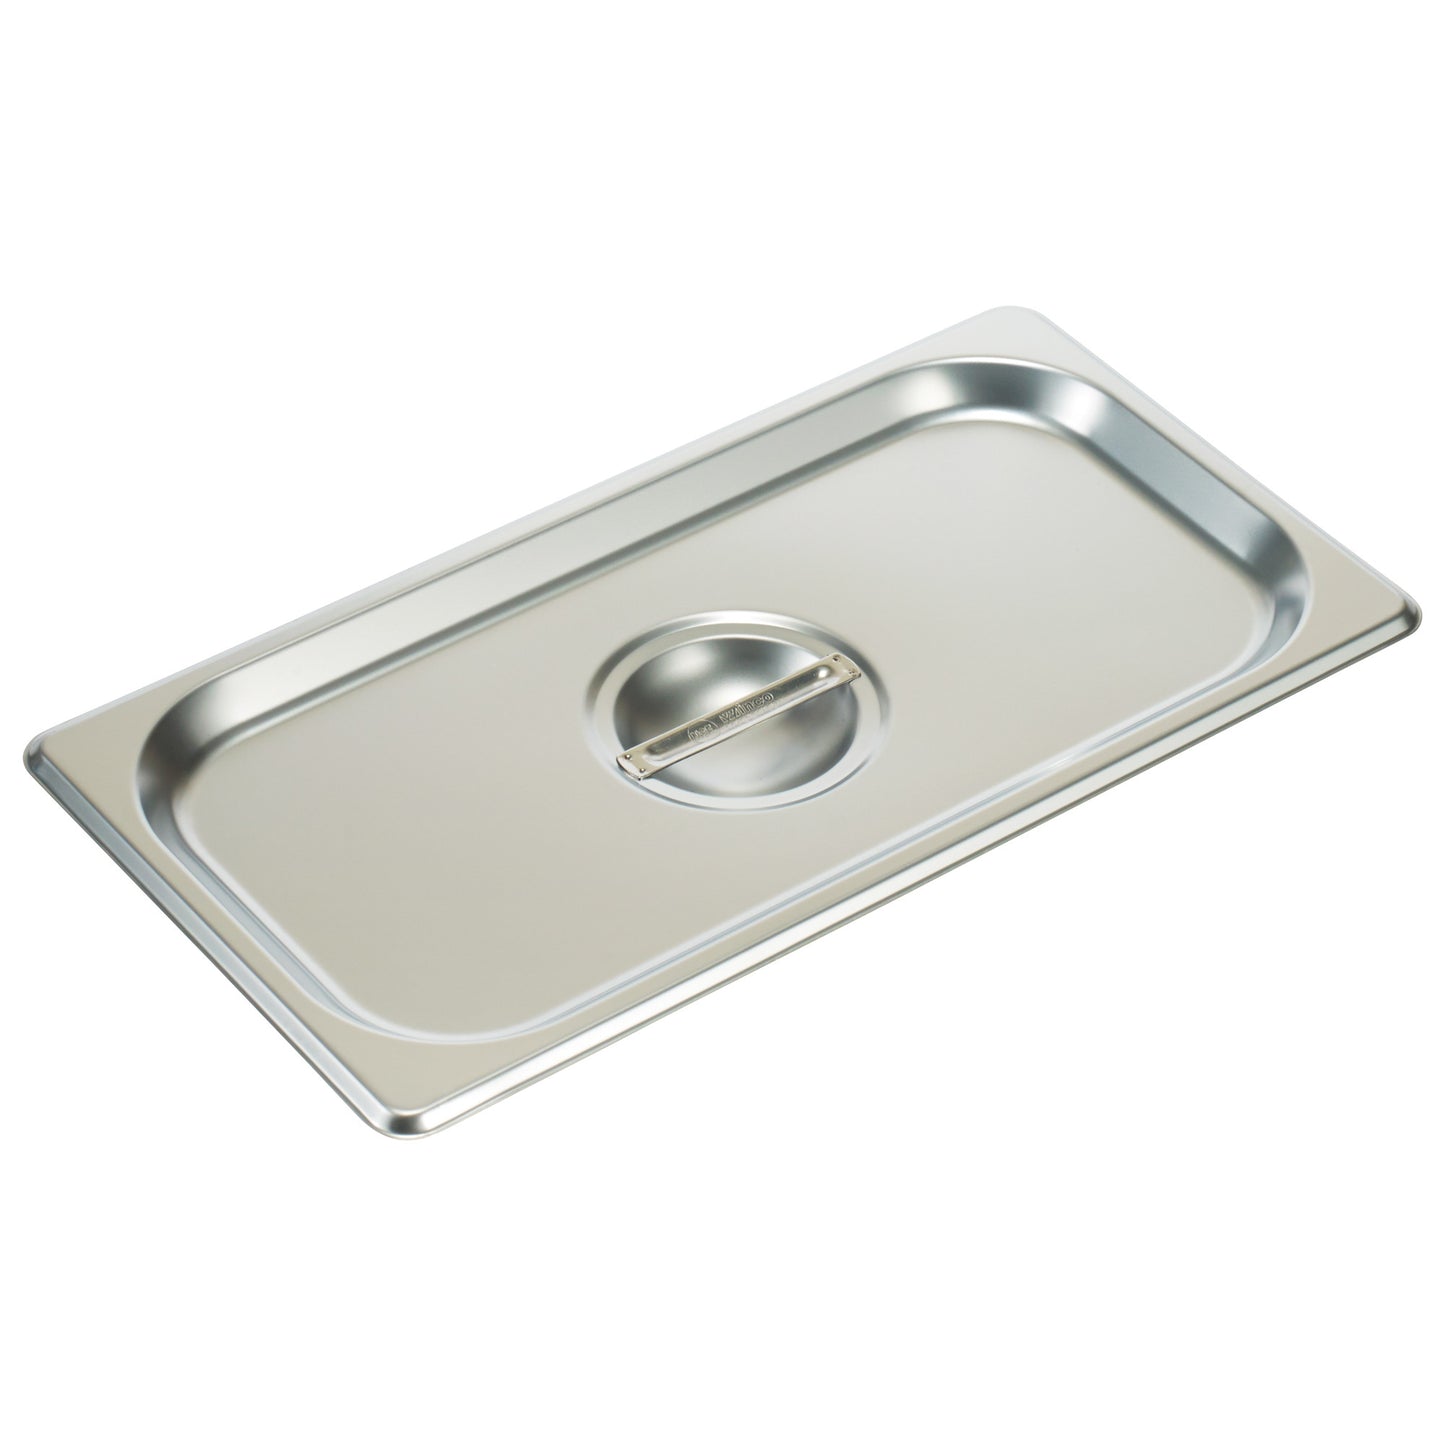 SPSCT - 18/8 Stainless Steel Steam Pan Cover, Solid - Third (1/3)